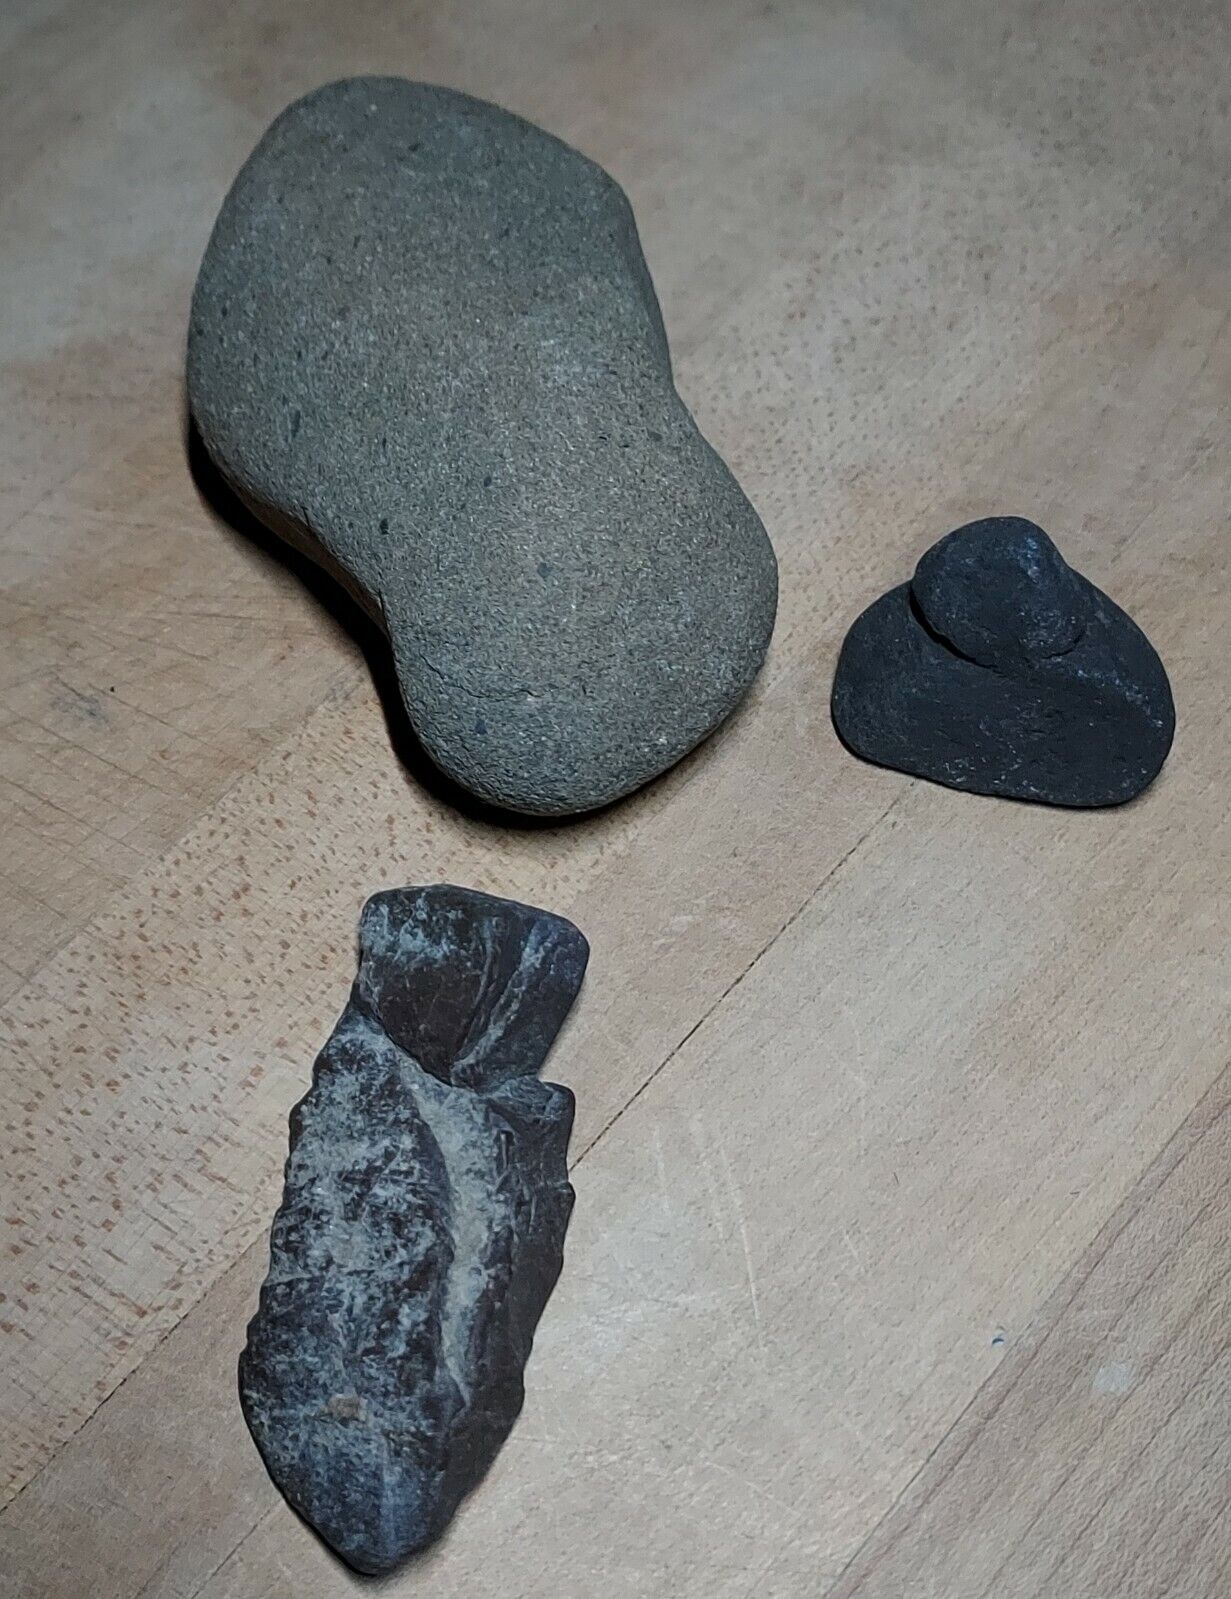  3 Native American  Indian Artifact  Stone Grooved  Net Weights/ Tools